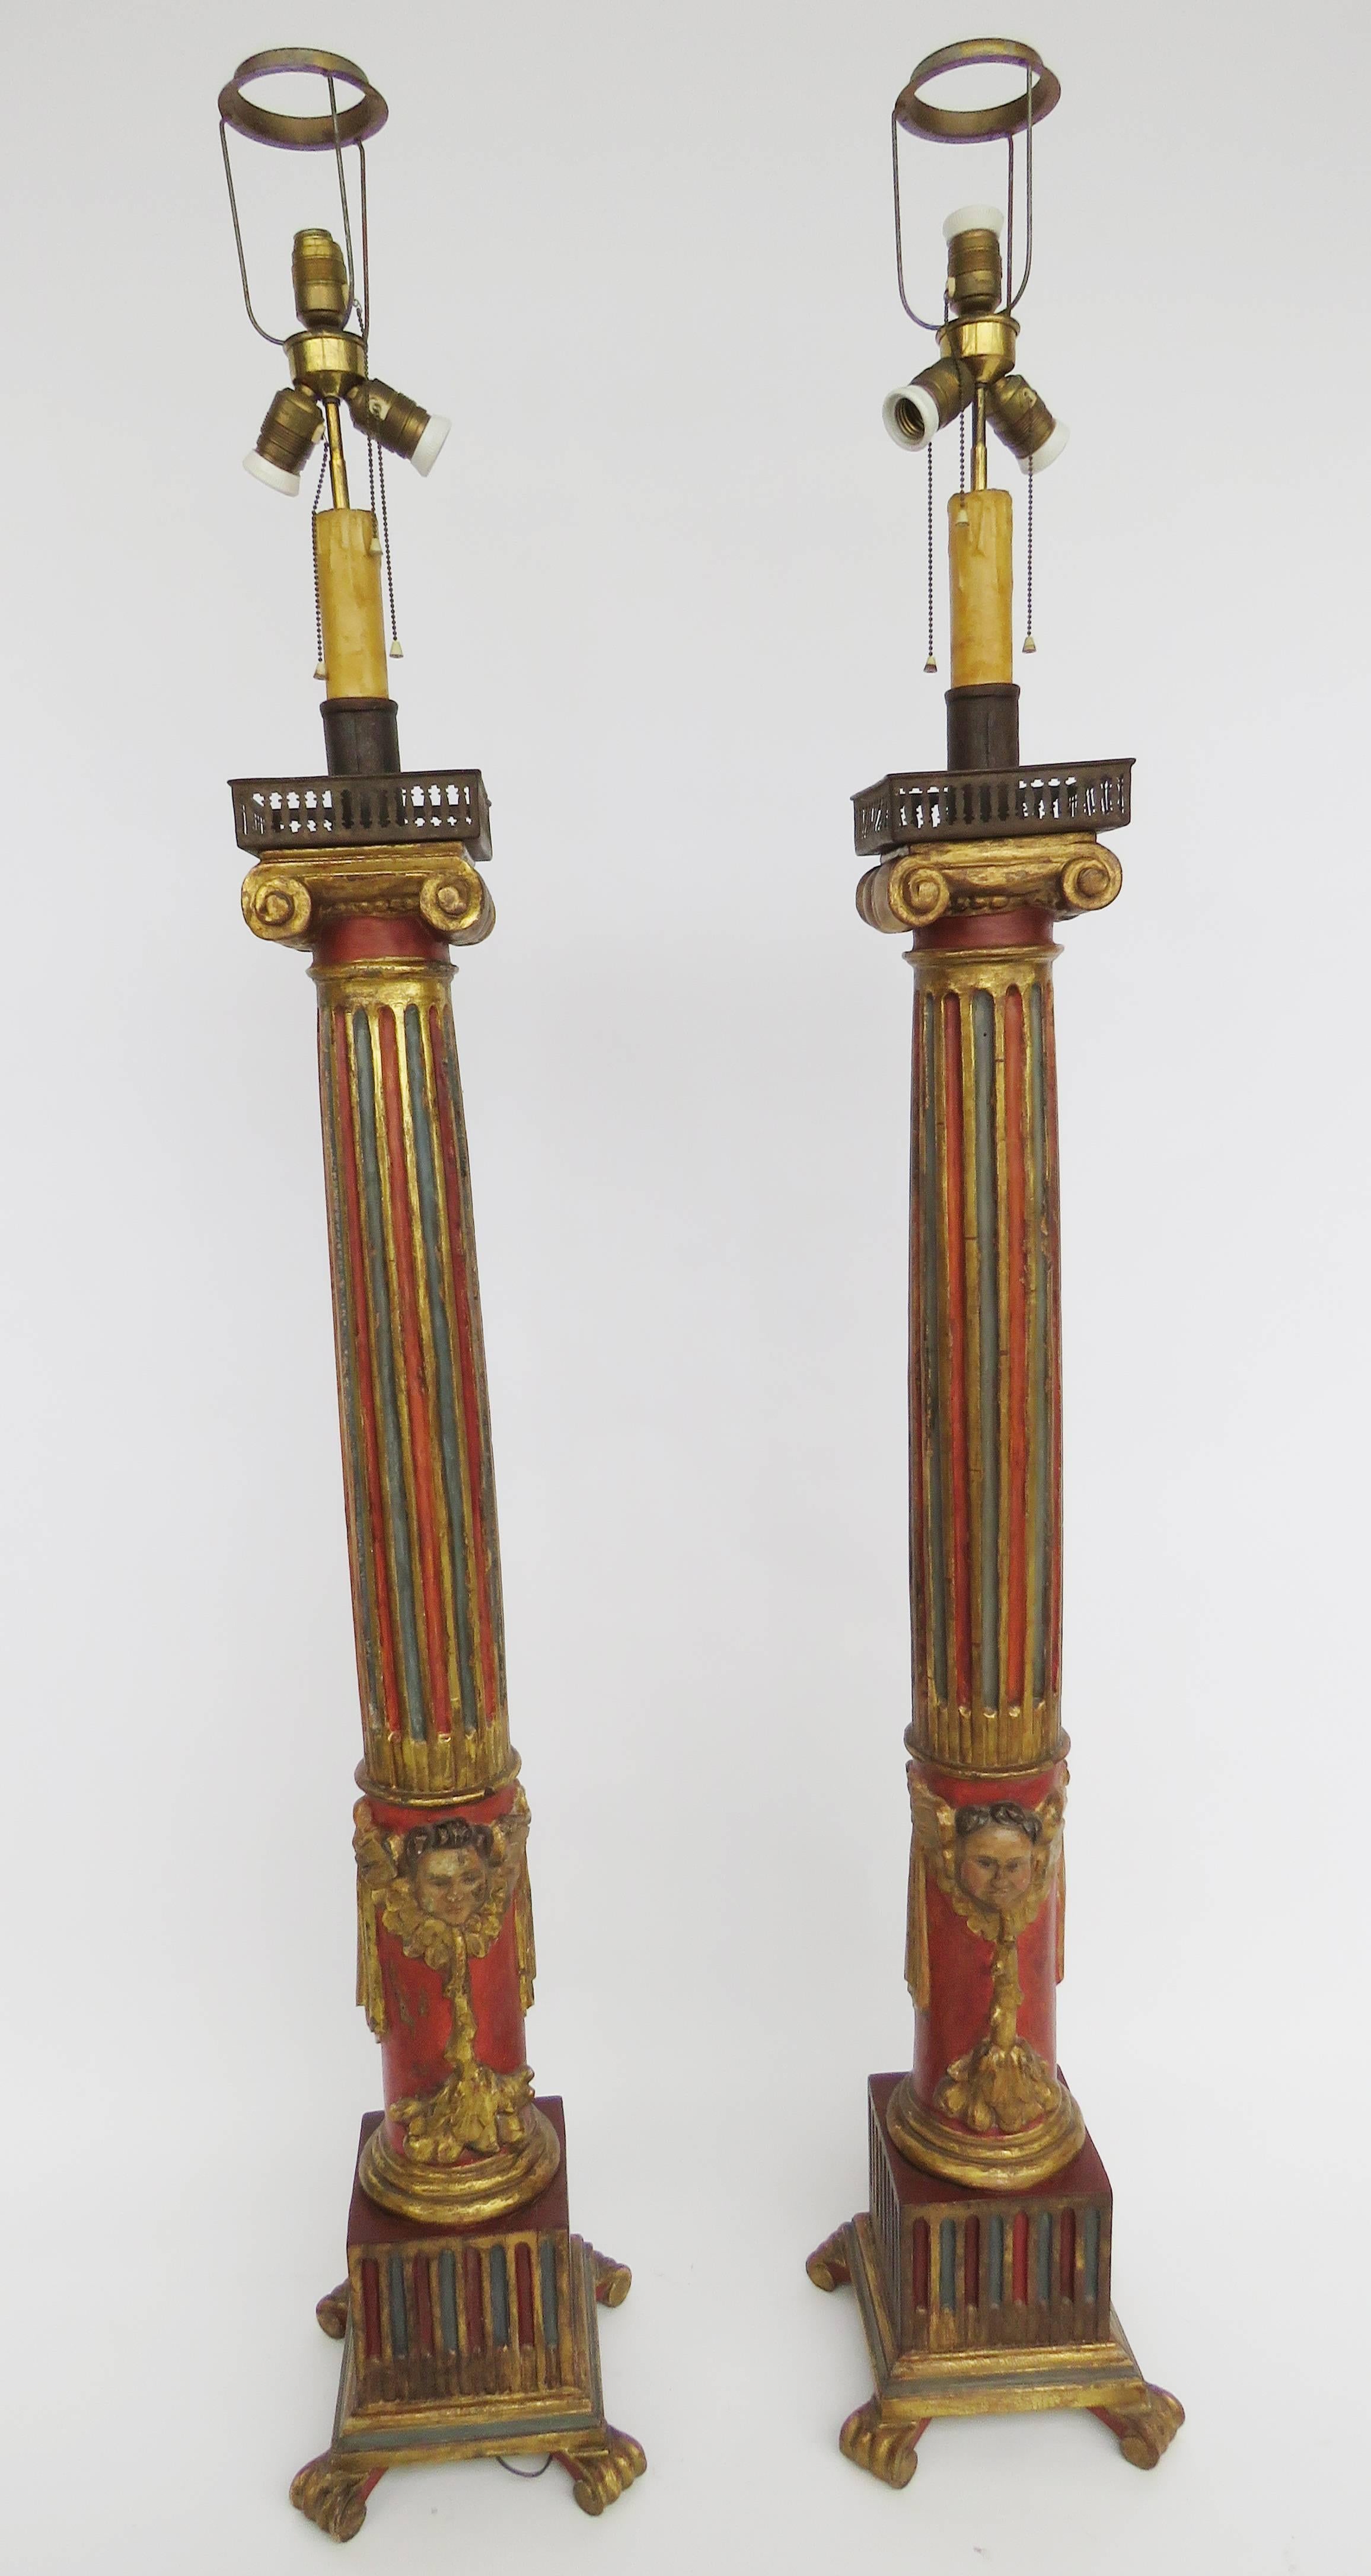 Red, blue and gold highly decorated fluted column surmounted by square scrolled platforms with iron candle holders, lower column with mask and swag carving, raised on square plinth and paw feet.